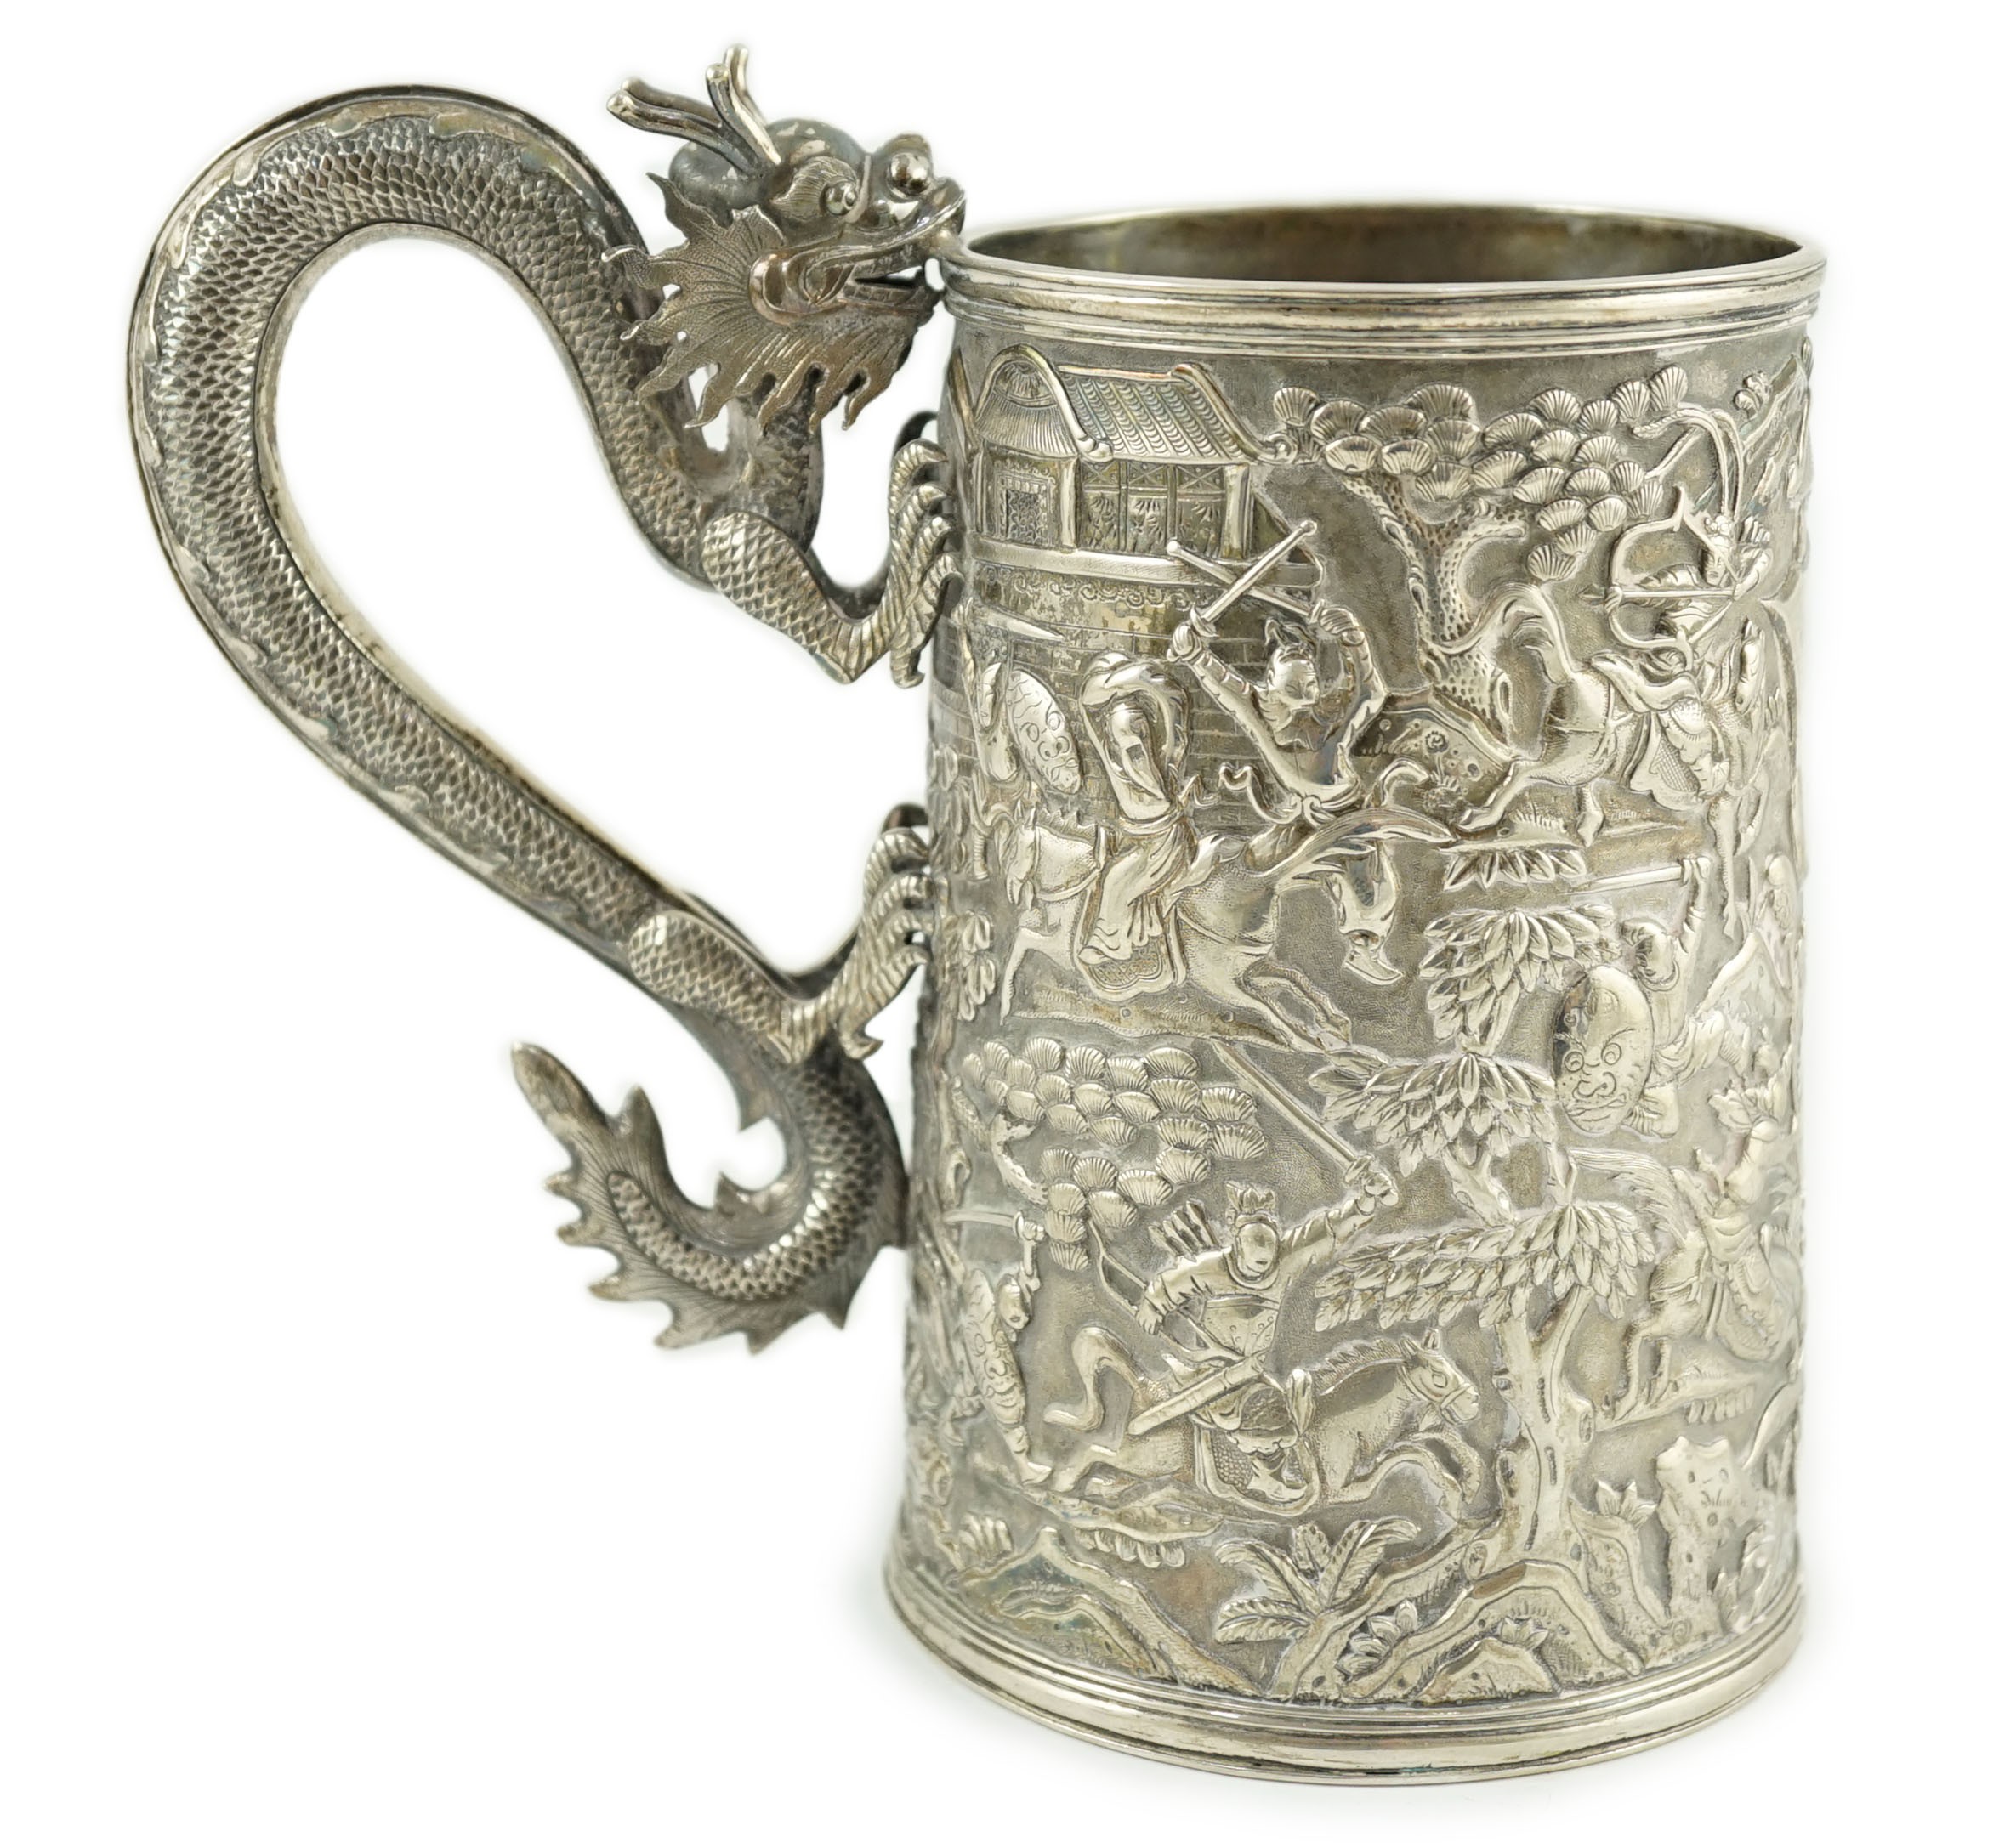 A late 19th century Chinese Export double skinned silver mug, by Leeching